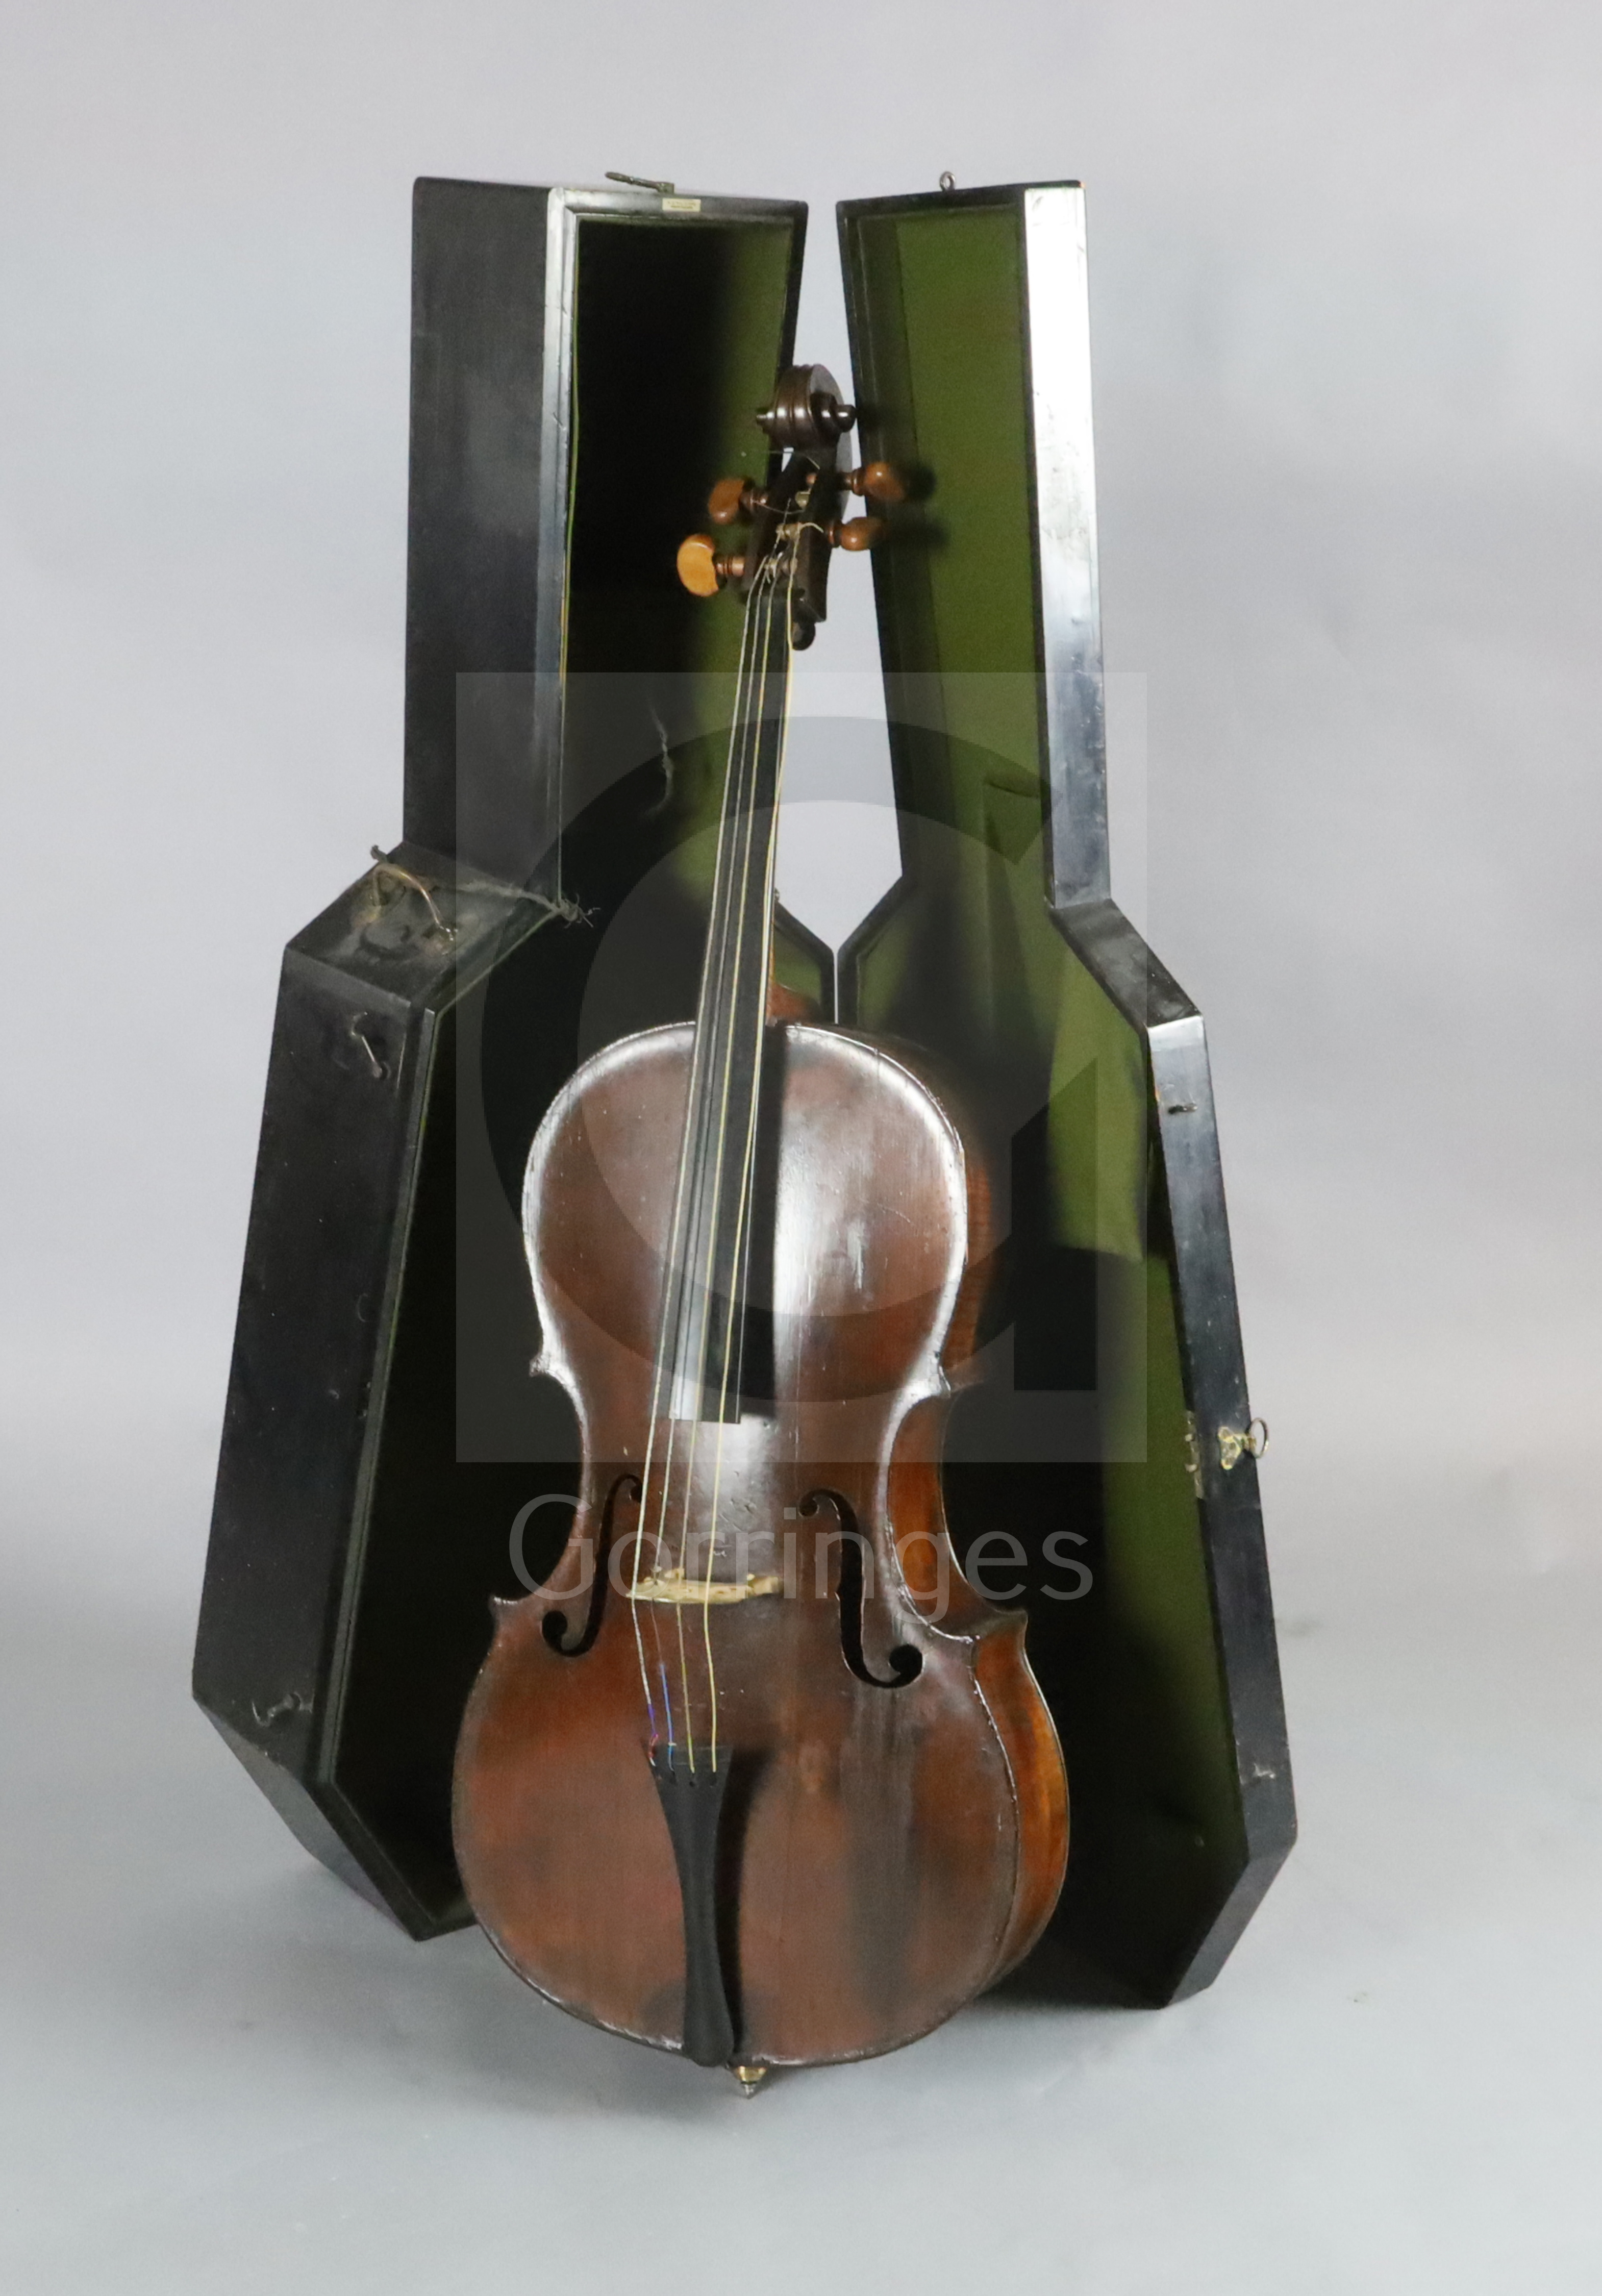 An 18th century cello, labelled 'Jacobus Stainer in absam prope oe nipontum 1660', in a W. E. Hill &